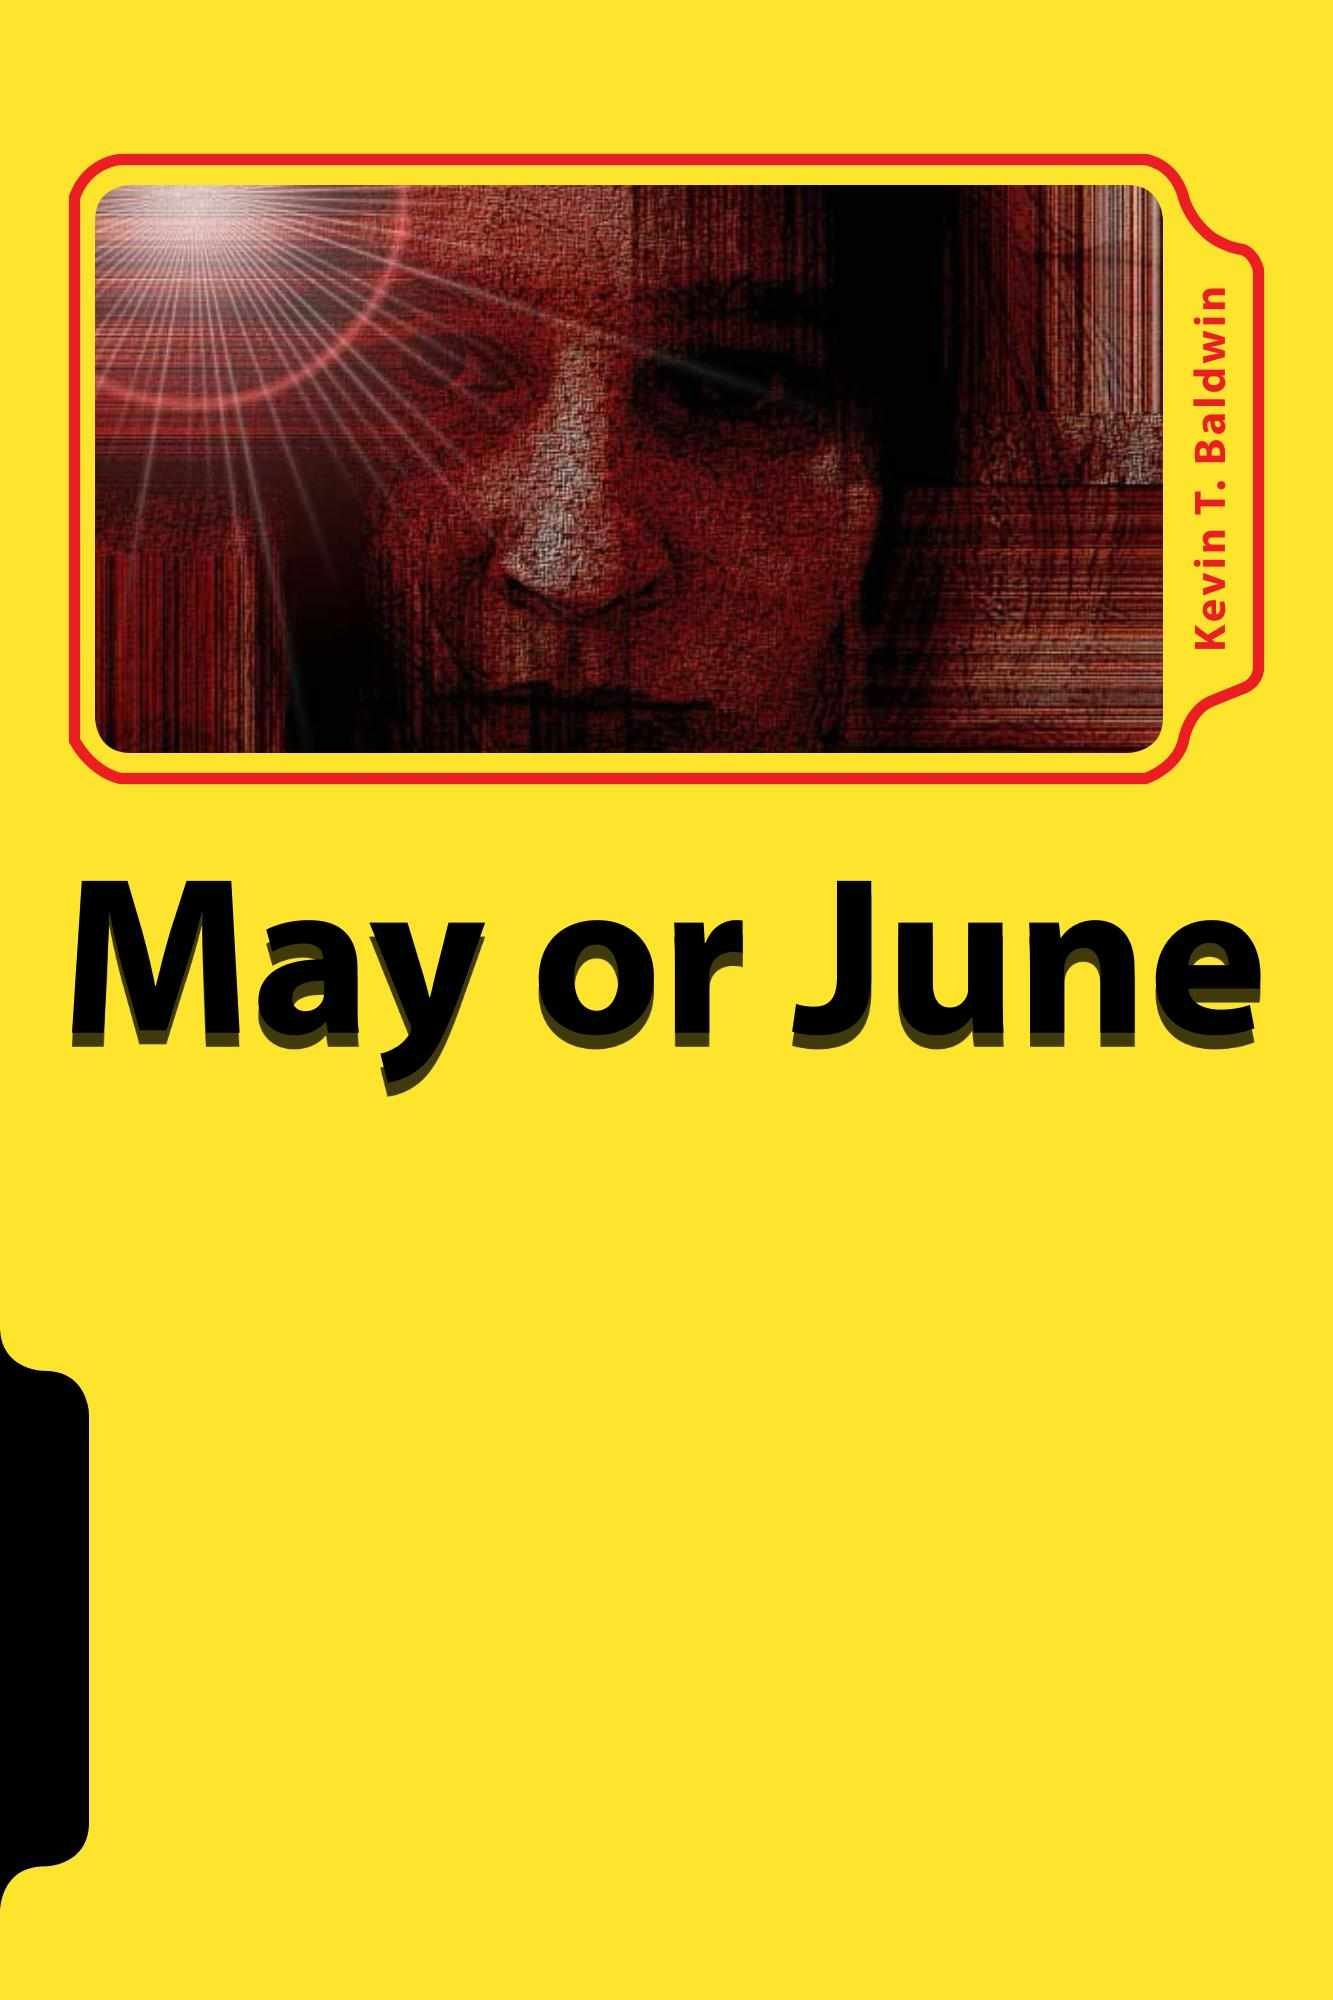 "May or June" - A Mystery in Two Acts